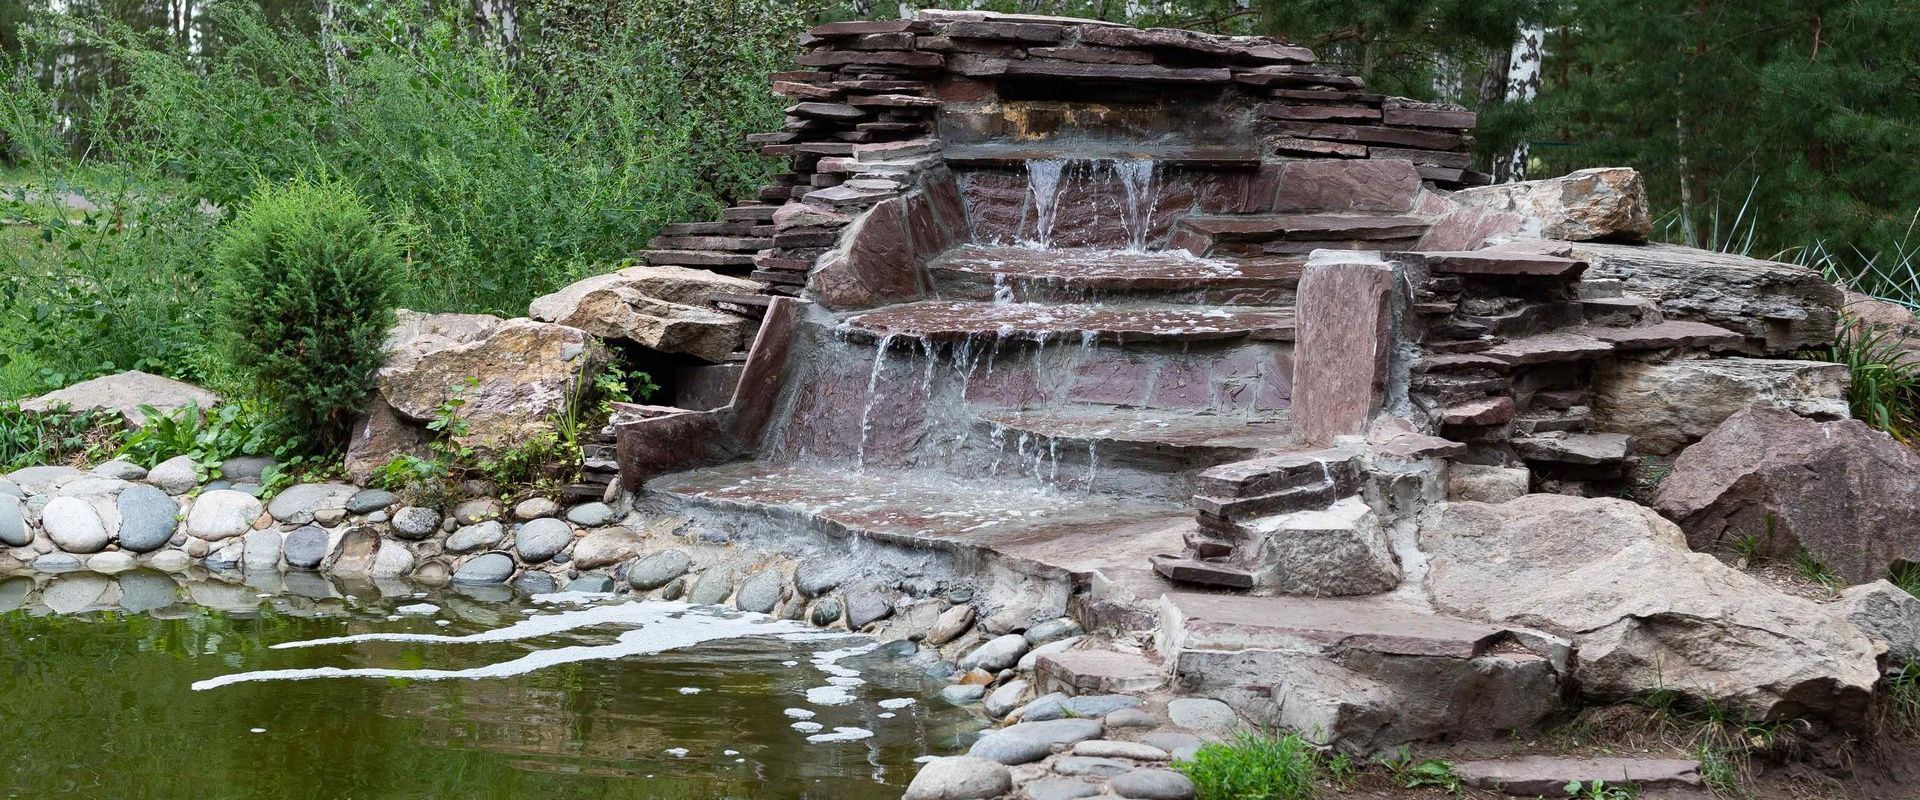 Landscaped Backyard Waterfall Flowing Into Pond